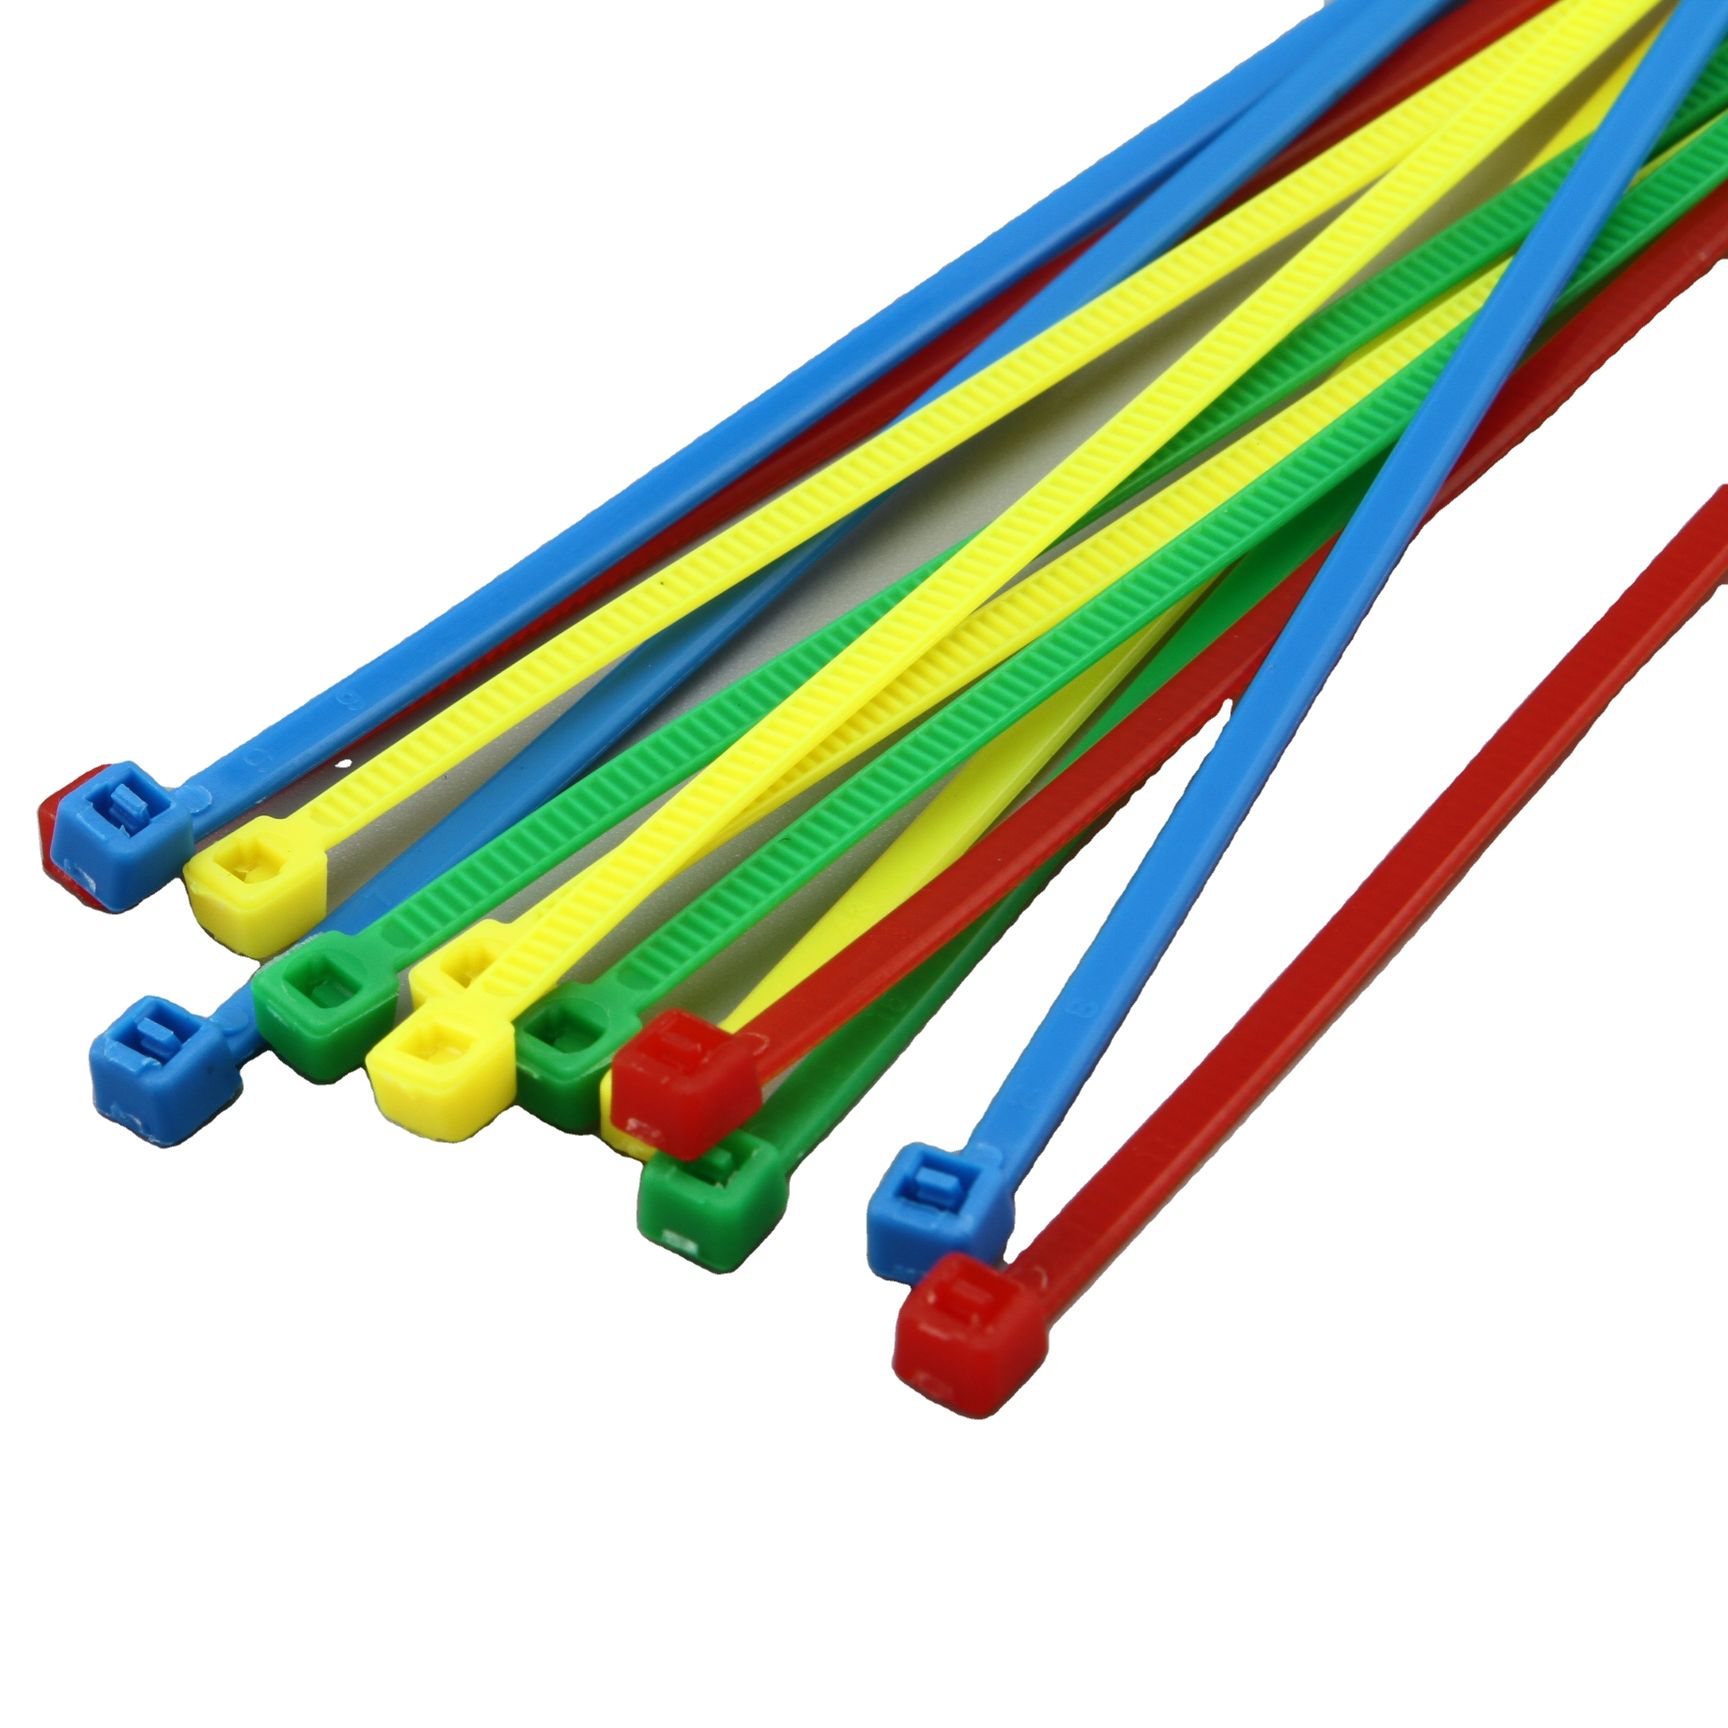 Fixed head cable ties - 4 